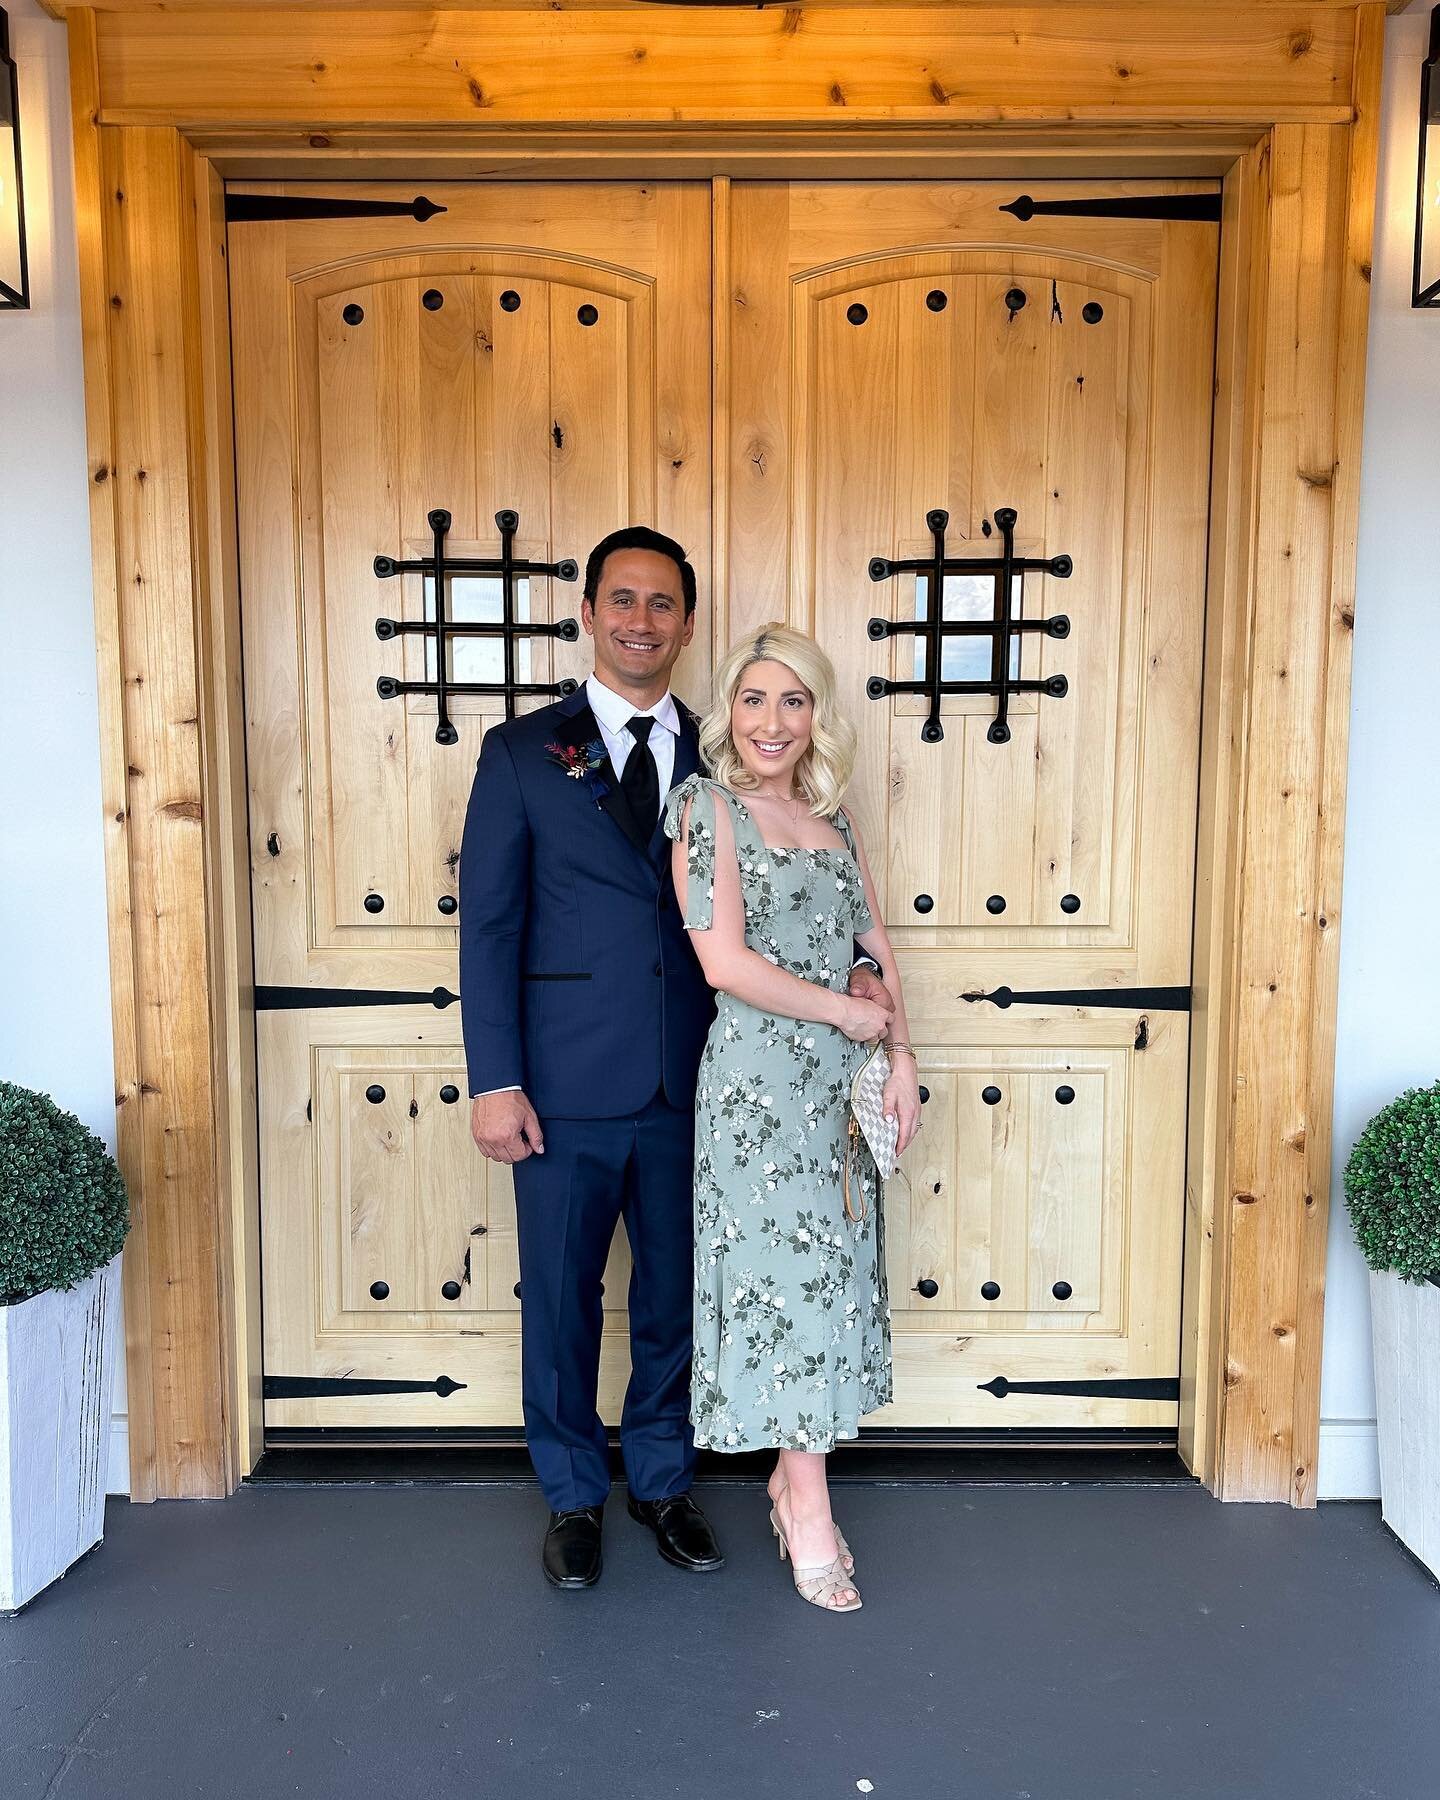 Happy Birthday to my best friend, and loving husband! No better way to celebrate than at the newly Mr. and Mrs. Ryan&rsquo;s wedding! Congrats! 🎉🍾 🥳 #love birthday #husband